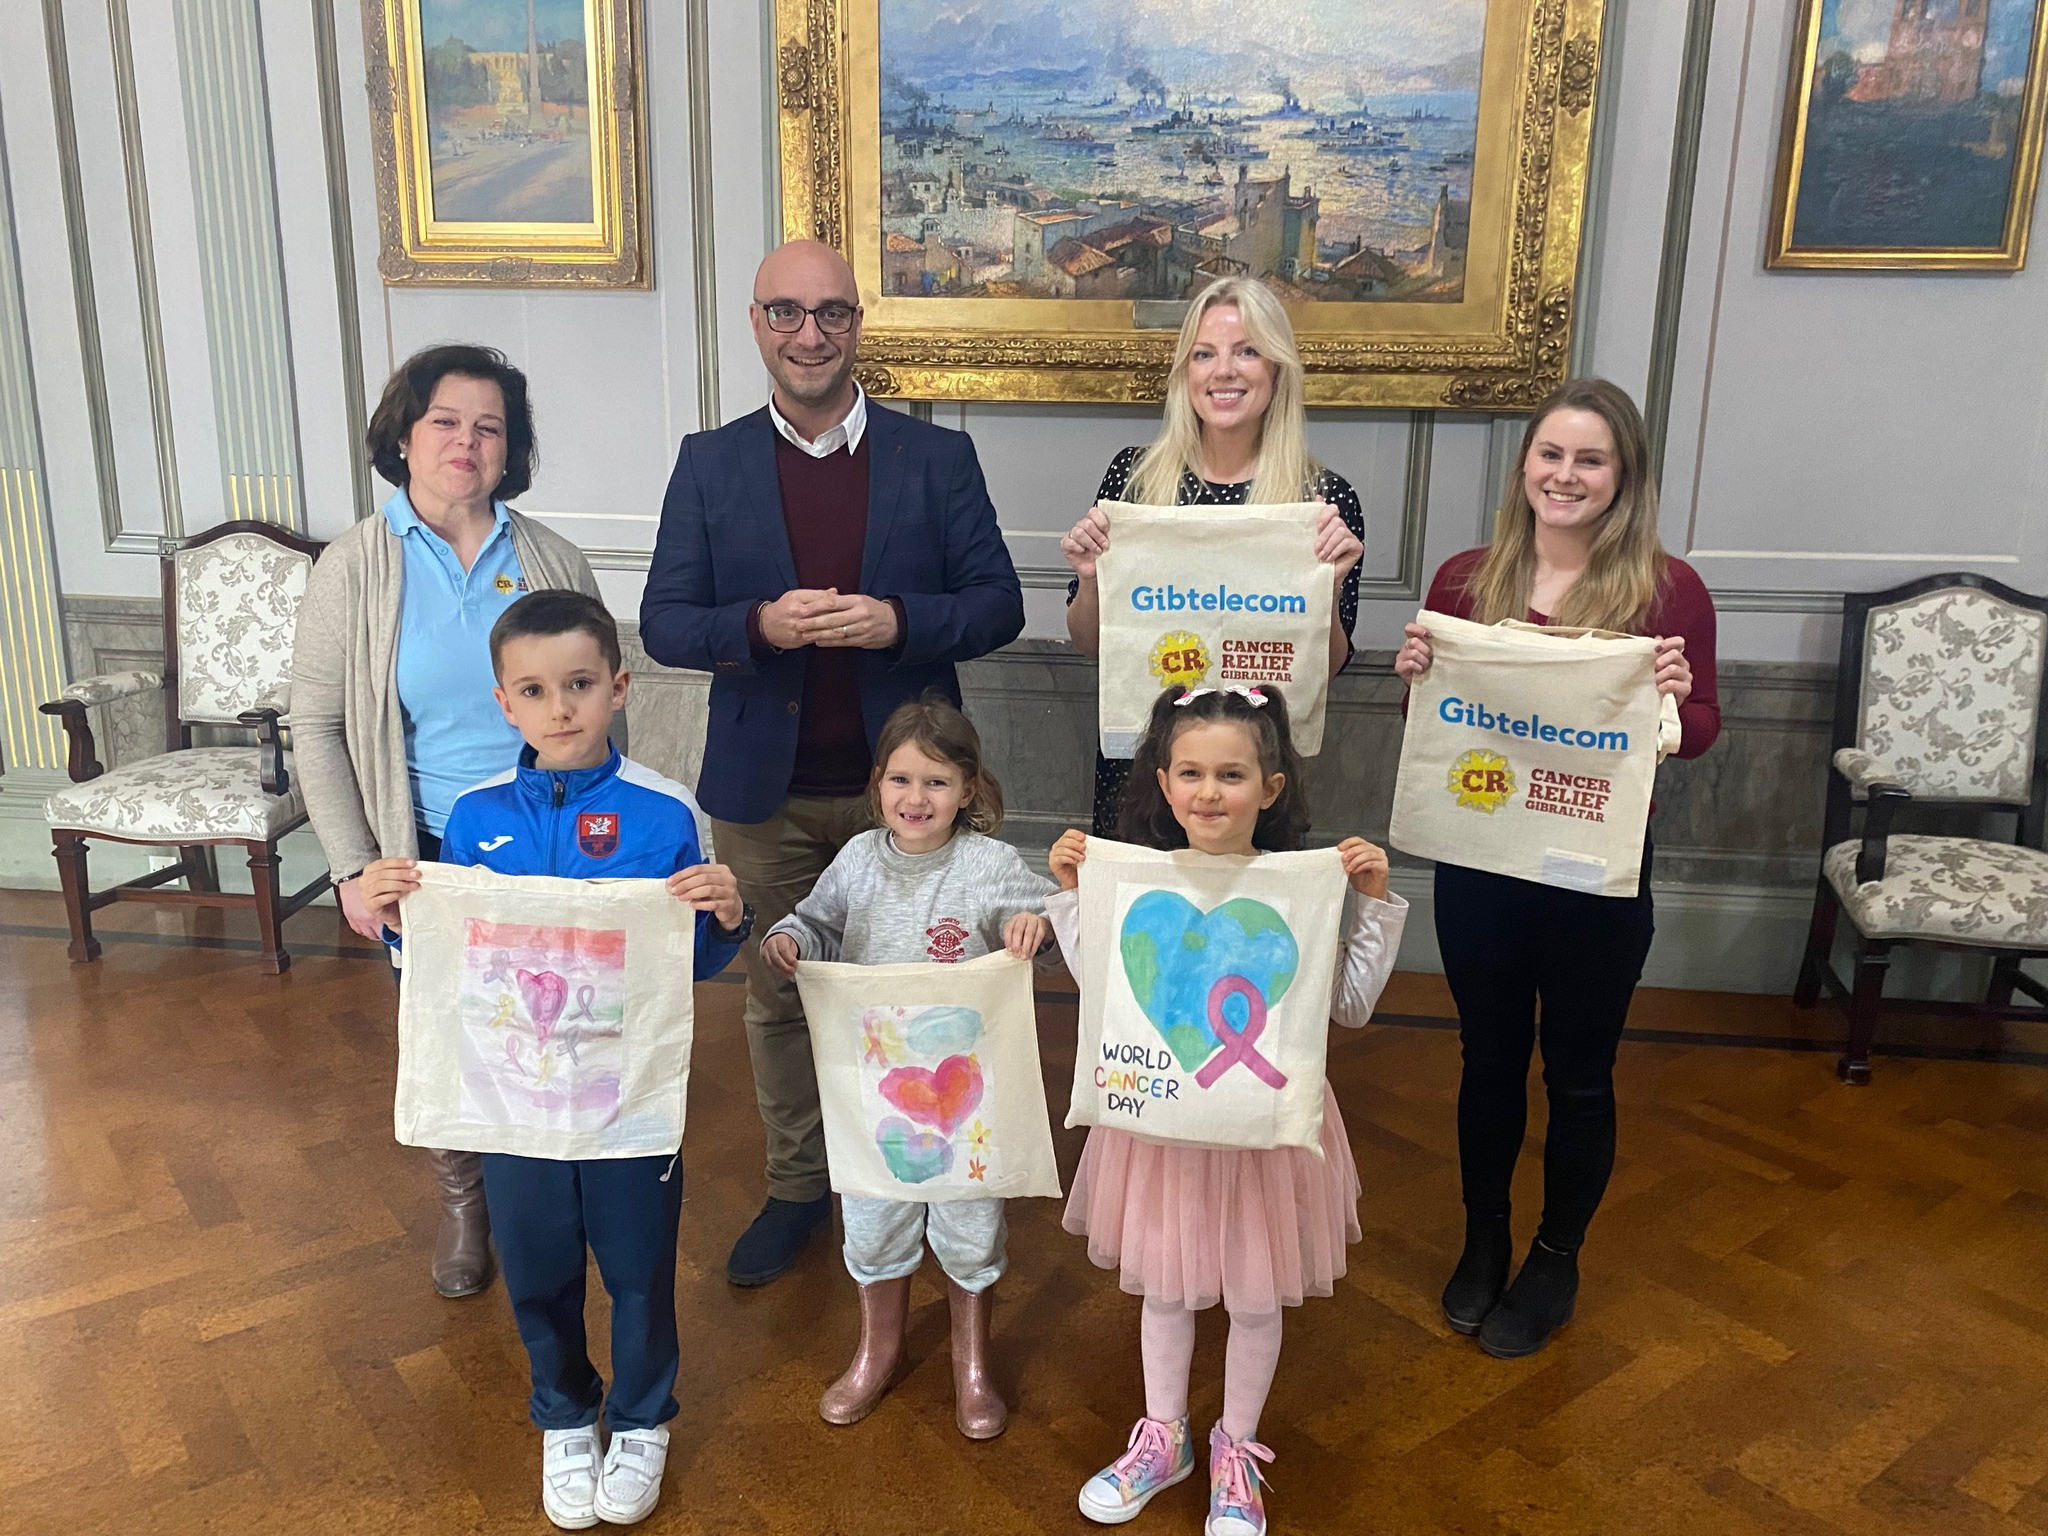 Local children celebrated by Gibtelecom in aid of Cancer Relief Gibraltar Image